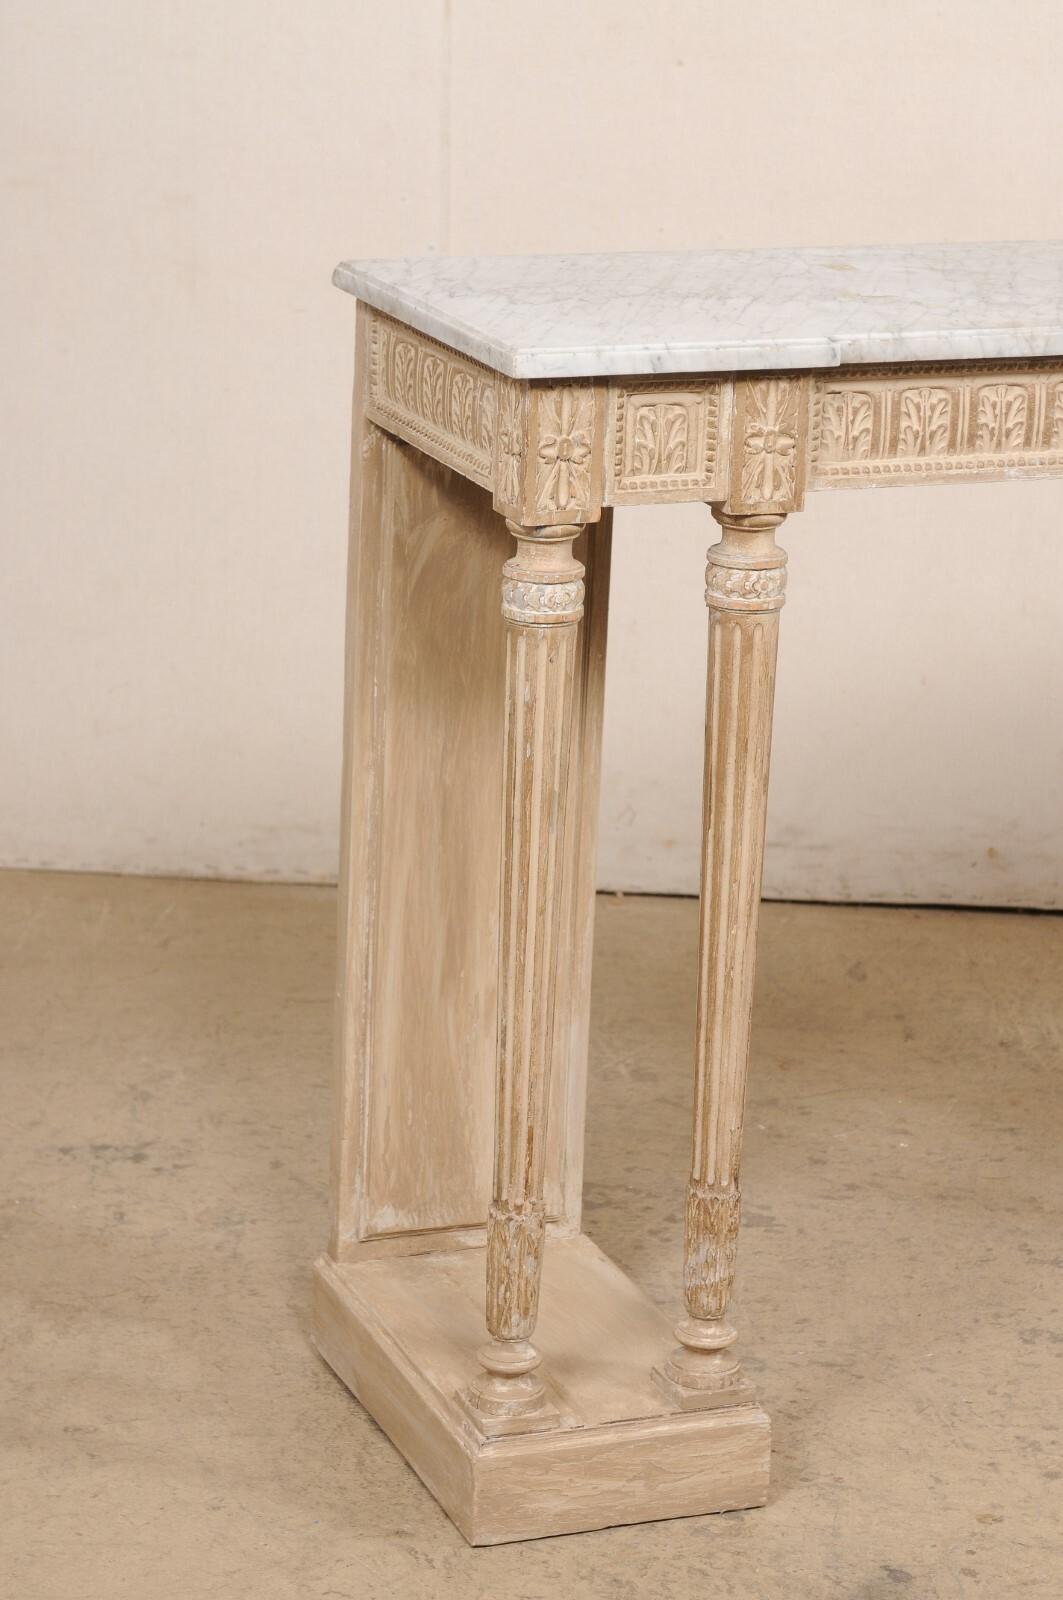 Neoclassical French Neoclassic Period Console w/Original White Marble Top & Great Legs! For Sale